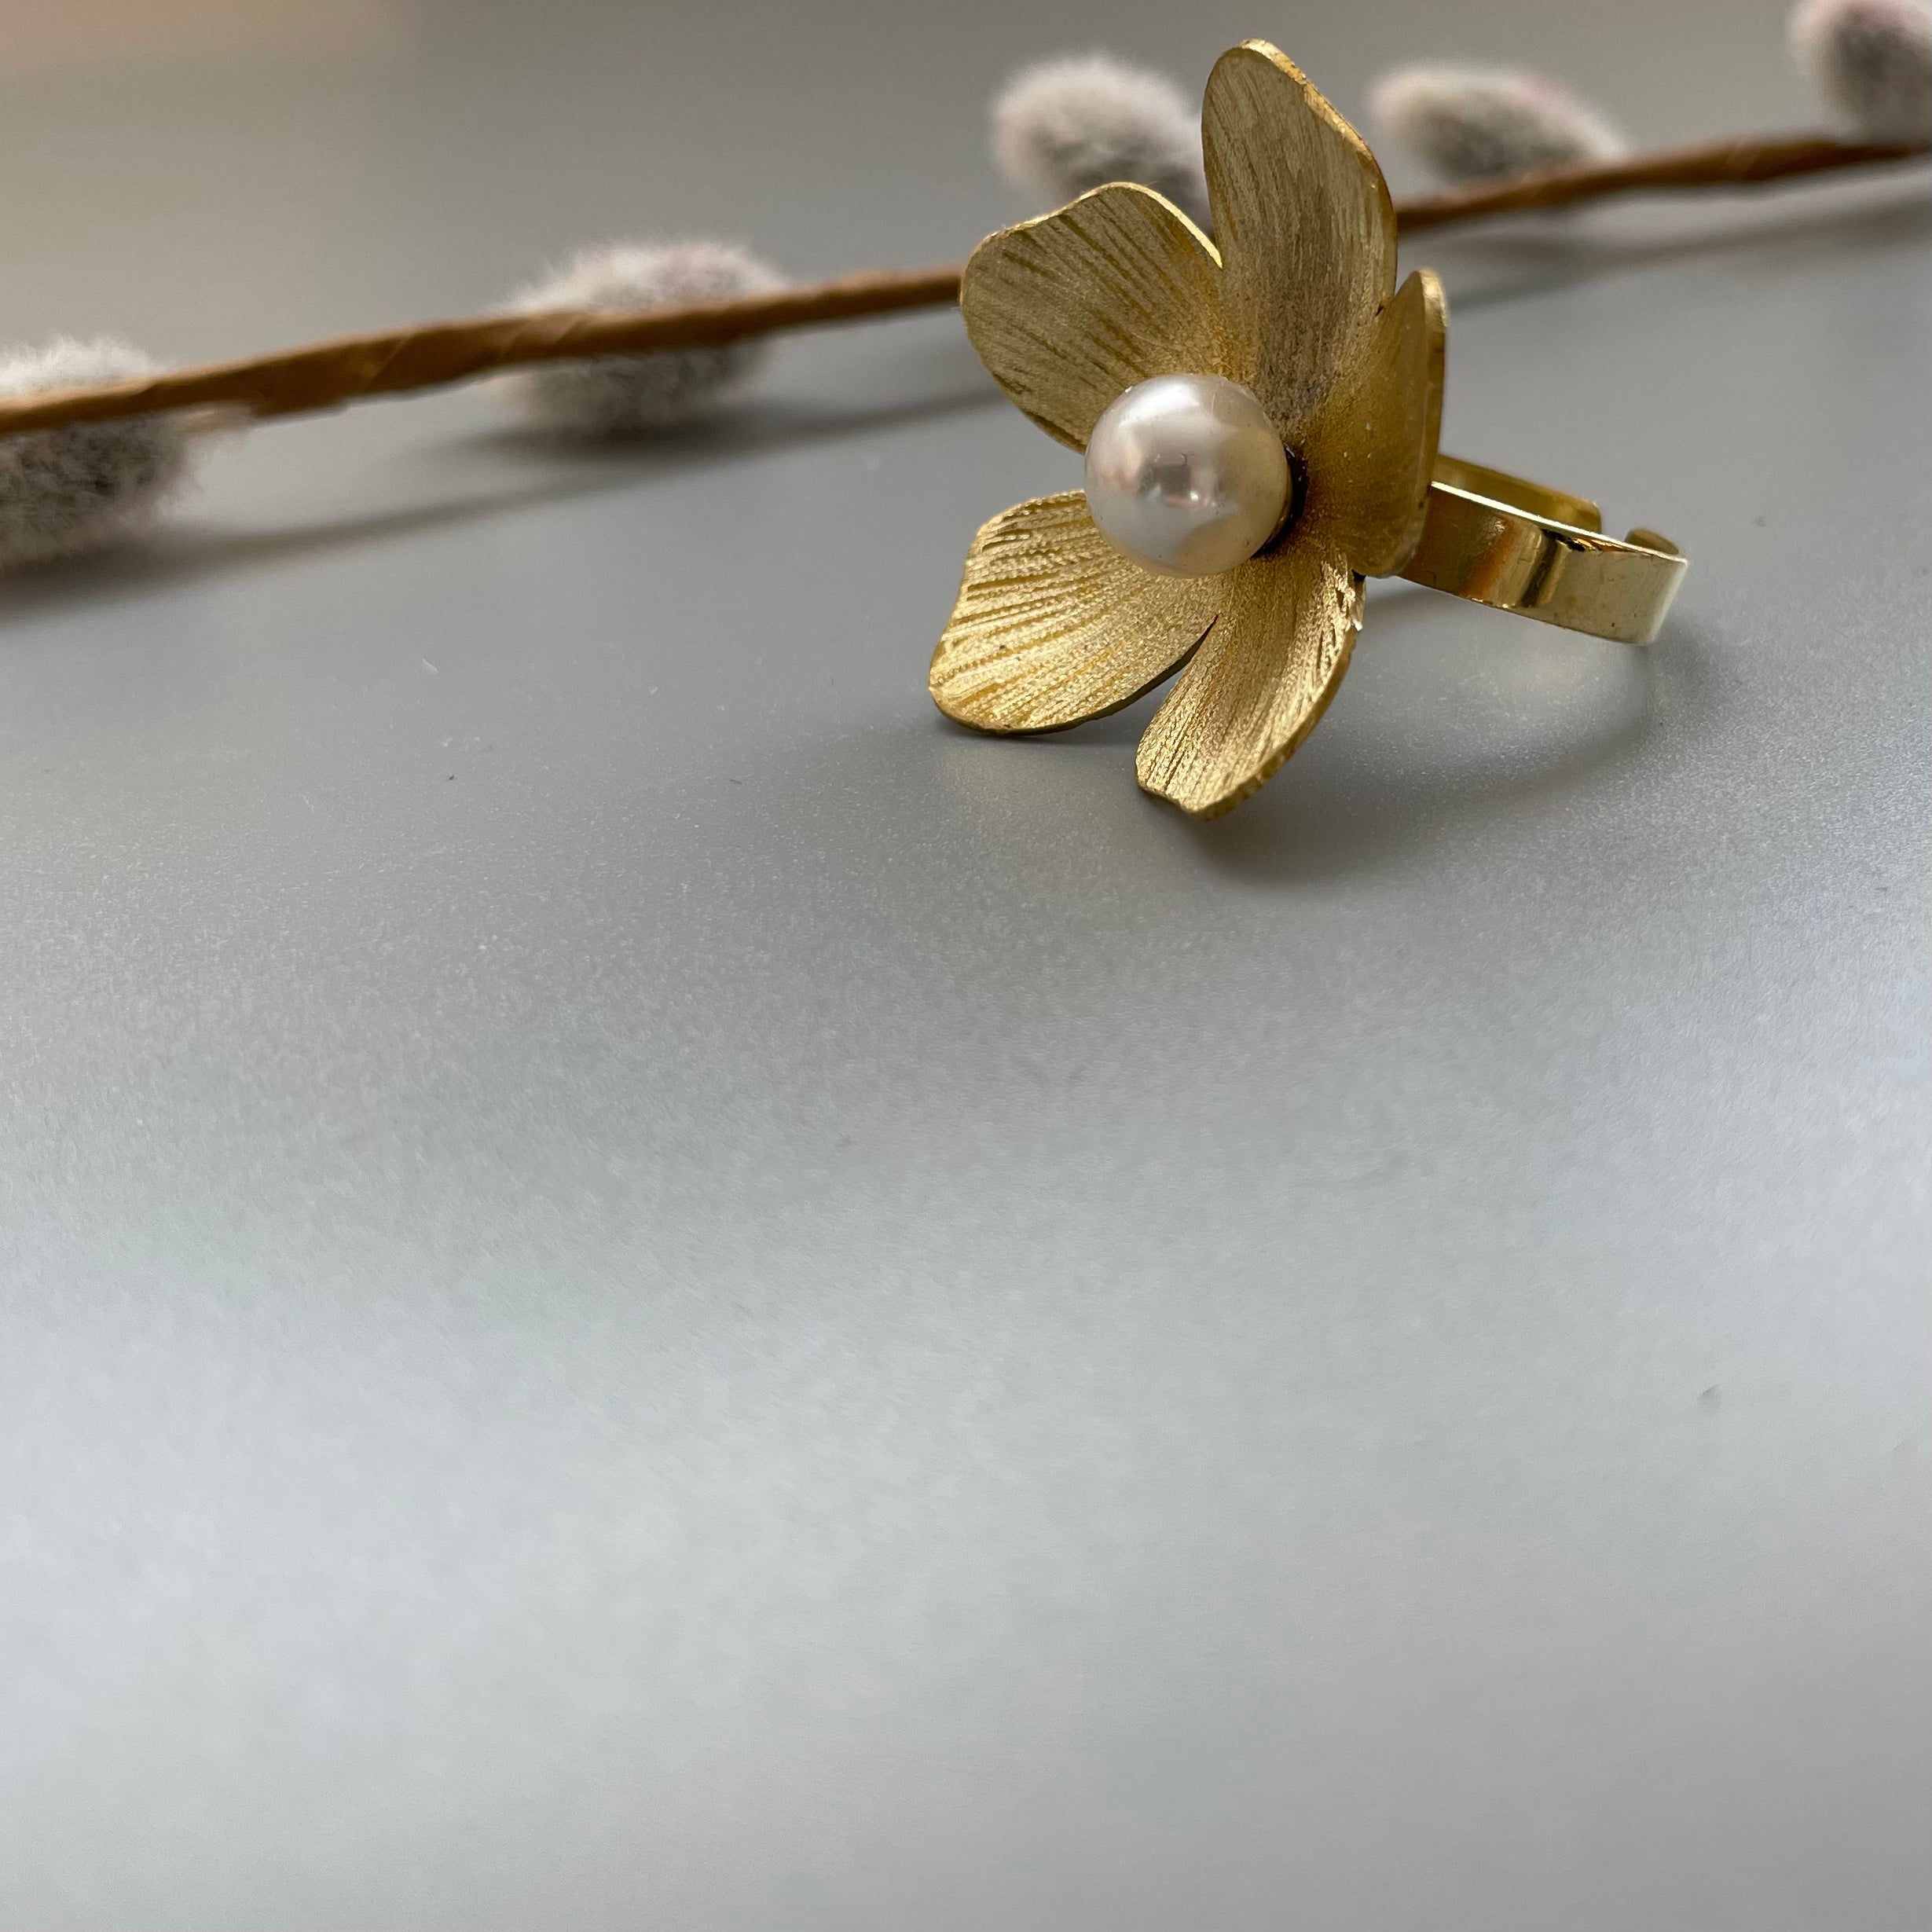 Persian Rings-Brass Flower Shaped Ring with Pearl: Persian Jewelry-AFRA ART GALLERY